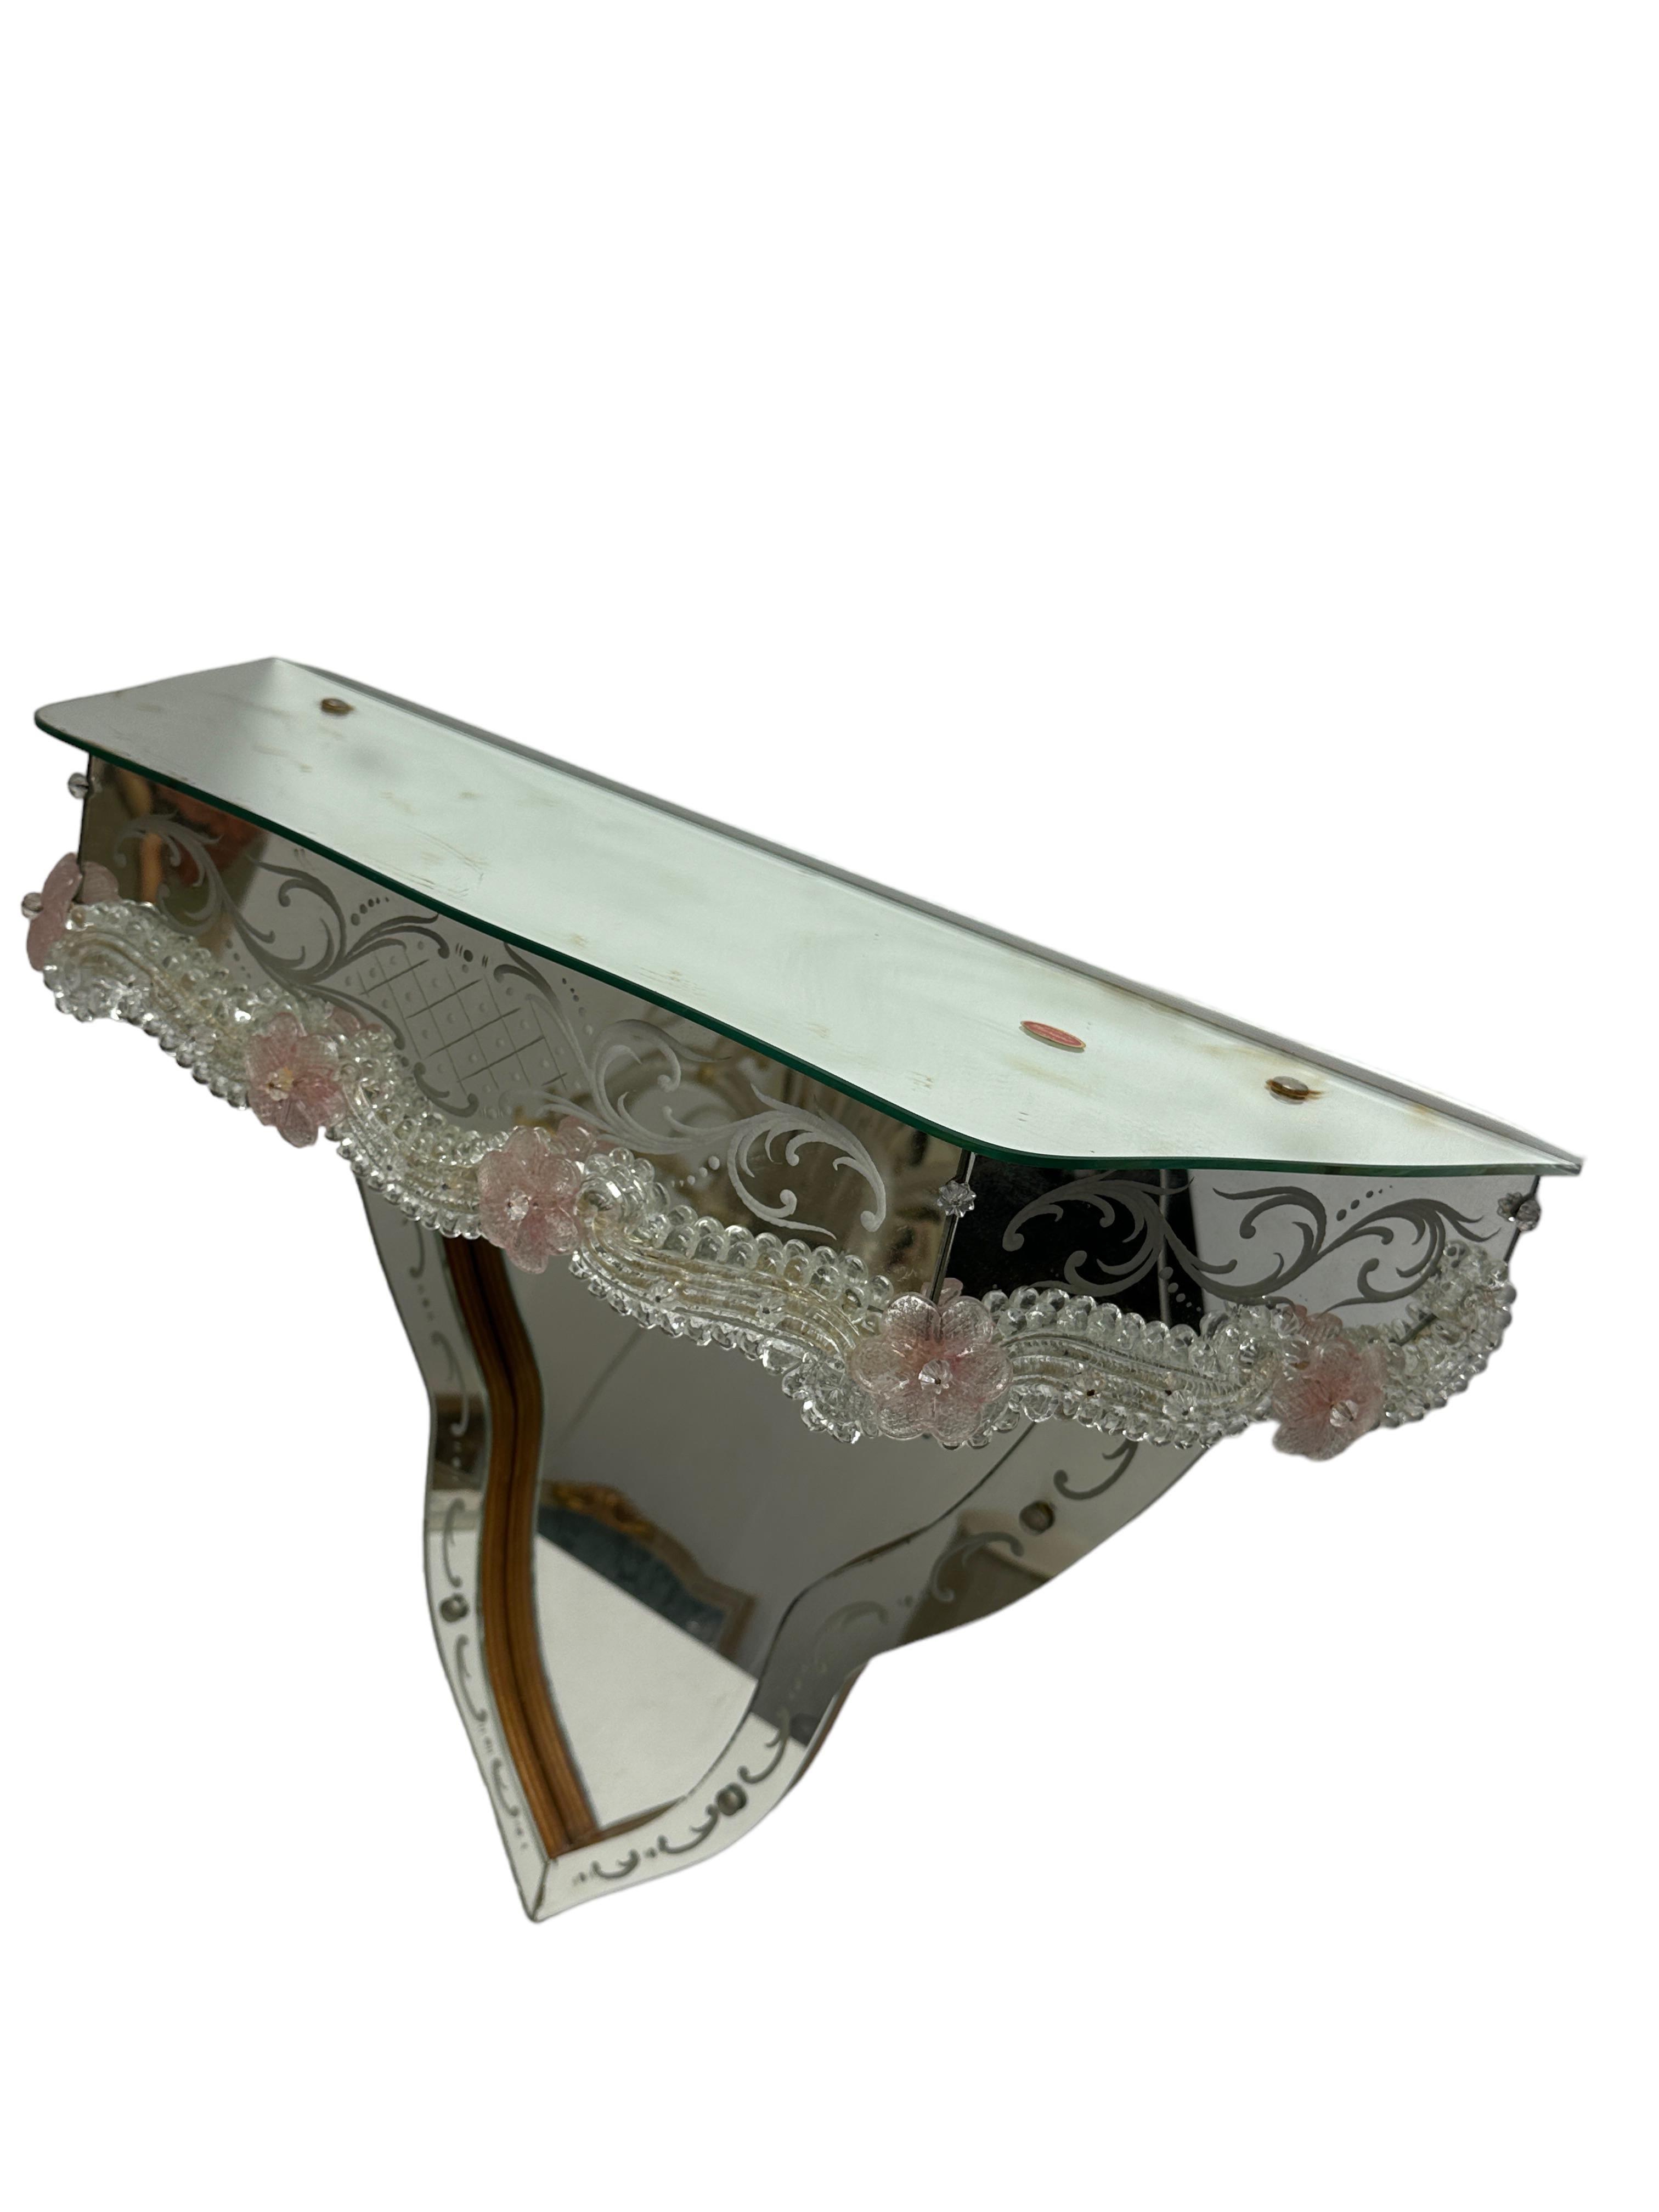 Stunning Murano Glass Mirrored Wall Console Pink Flowers, 1950s Italy 1